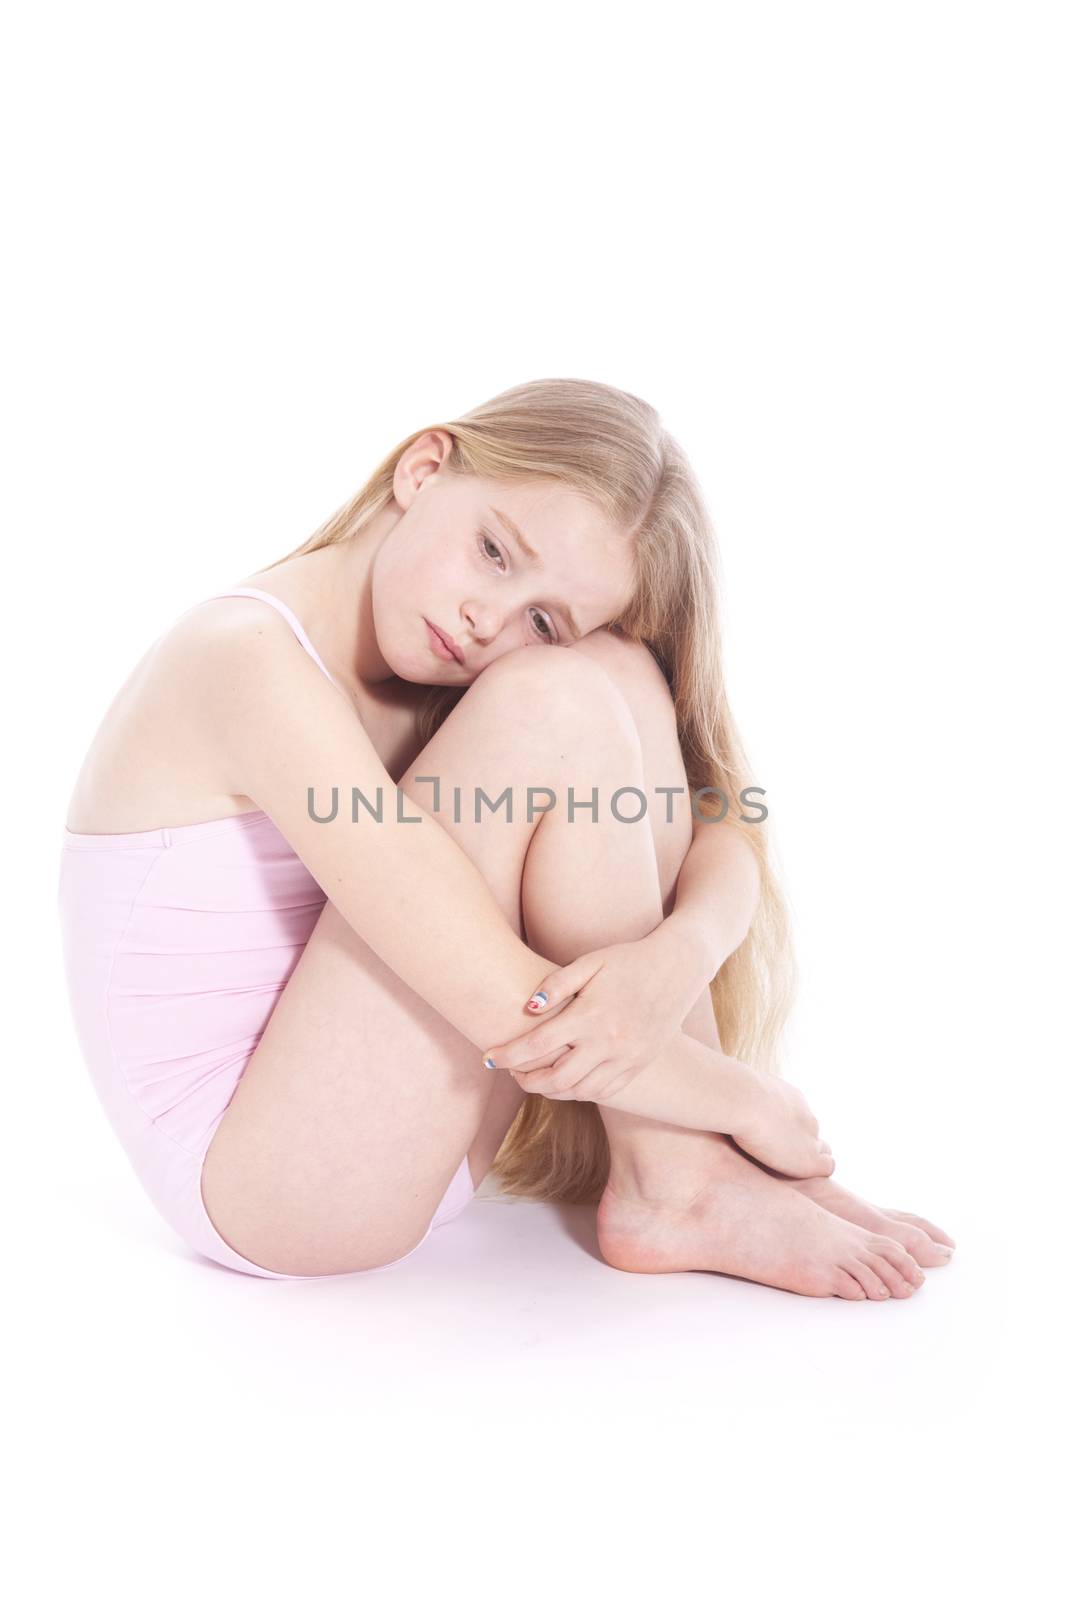 young girl in pink with sad expression sitting on floor of studi by ahavelaar